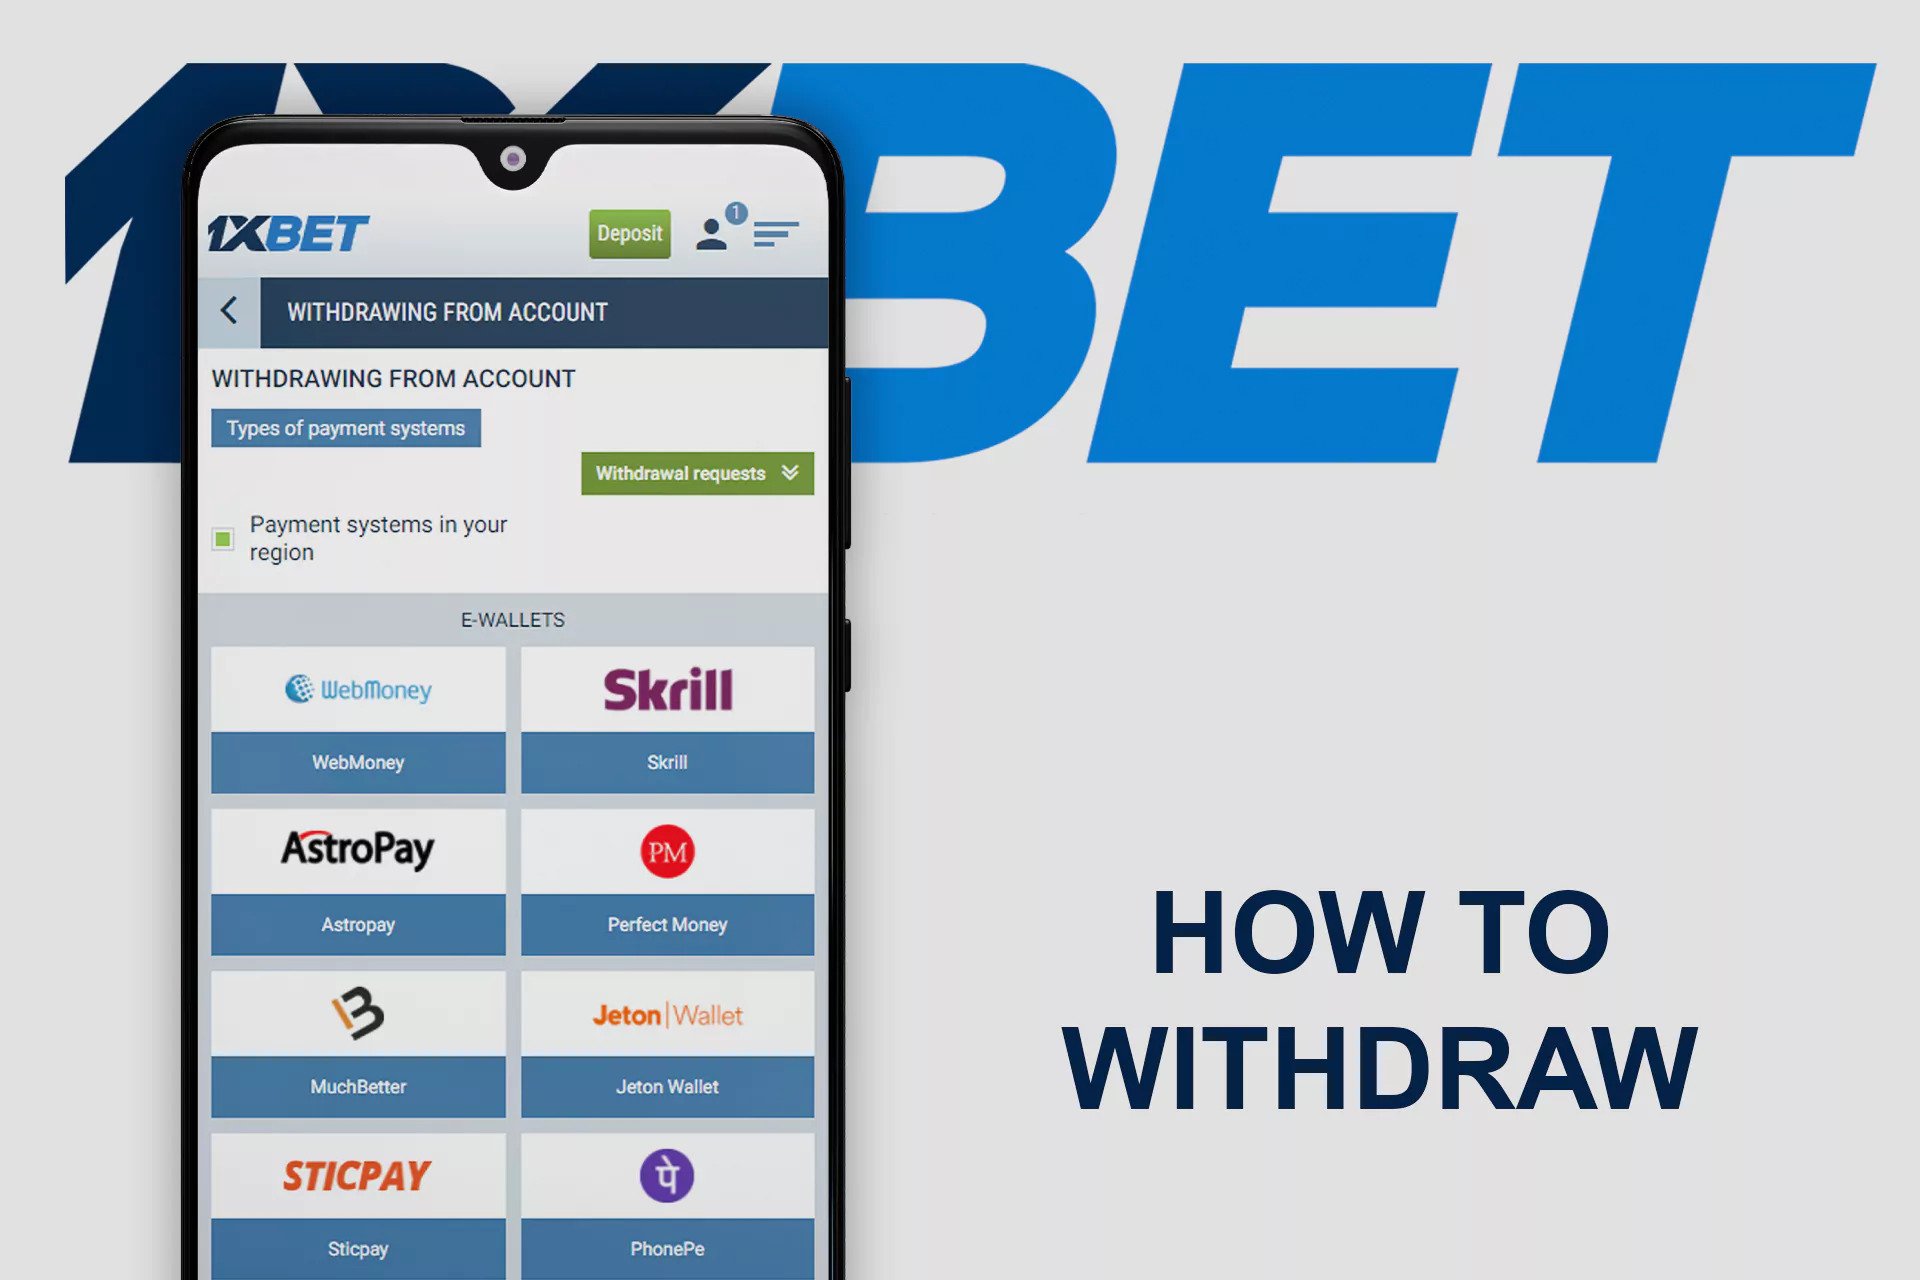 Depositing and withdrawing funds on 1xBet